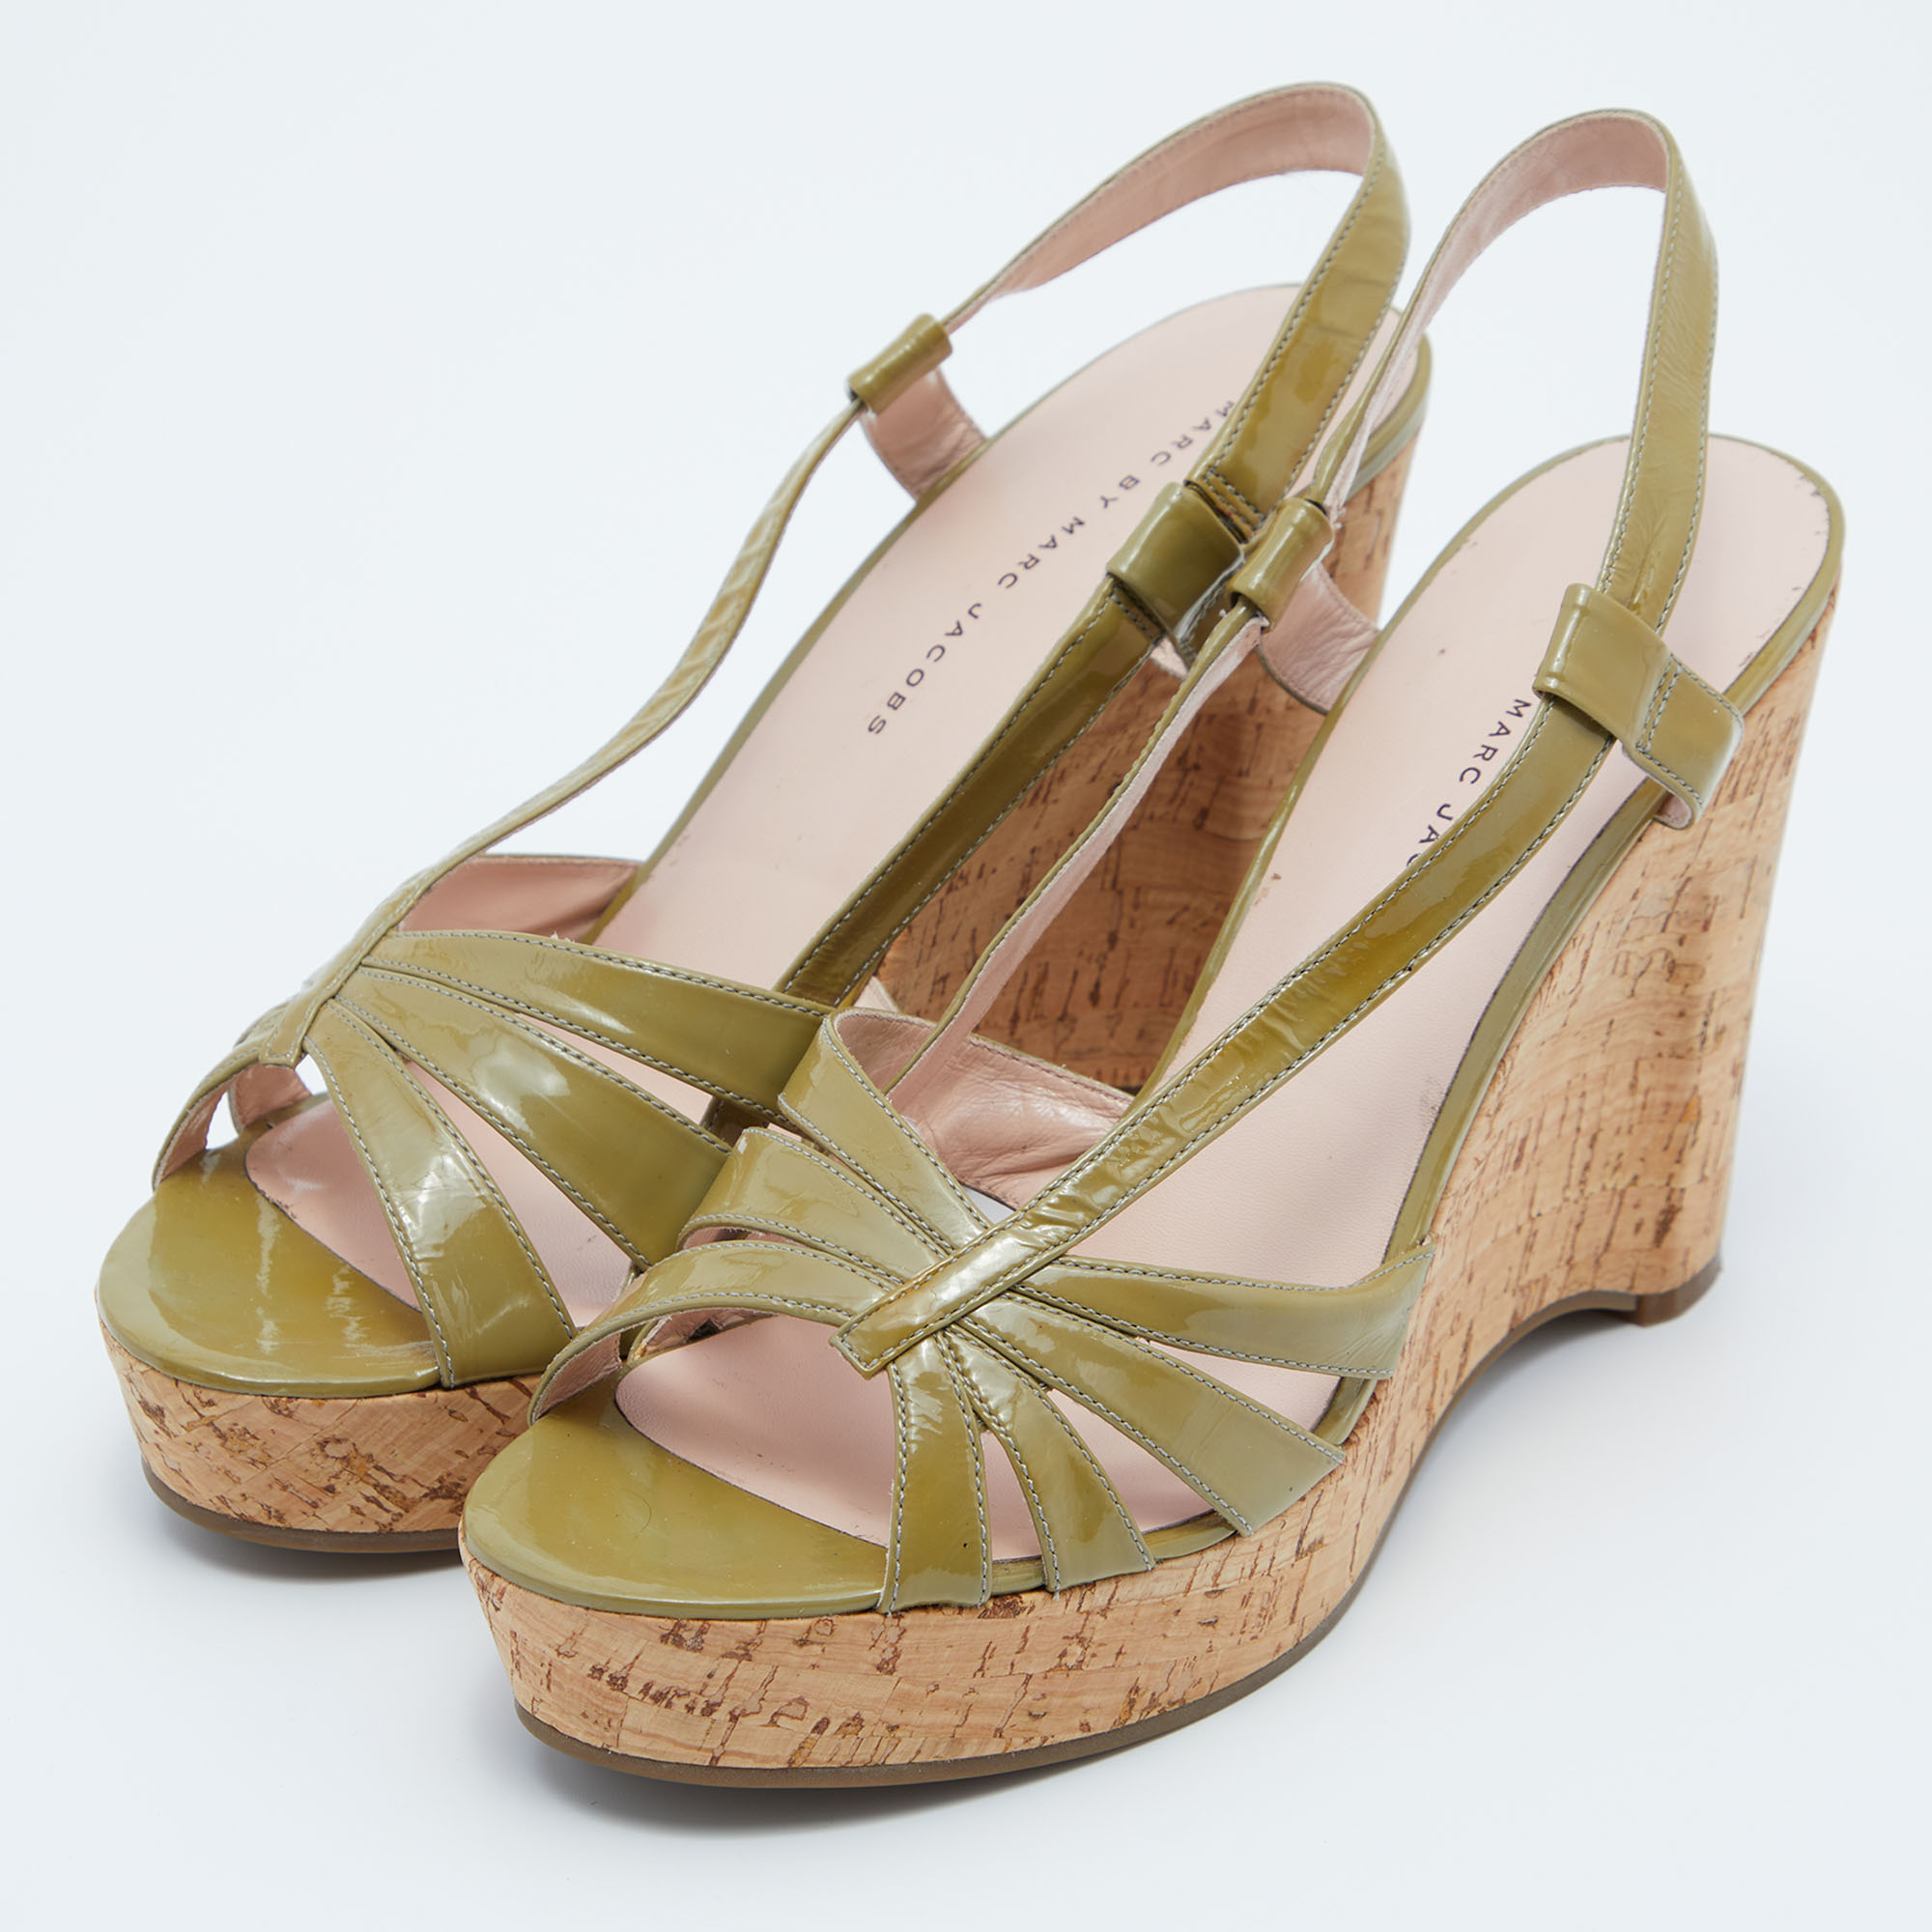 

Marc by Marc Jacobs Green Patent Leather Wedge Platform Ankle Strap Sandals Size